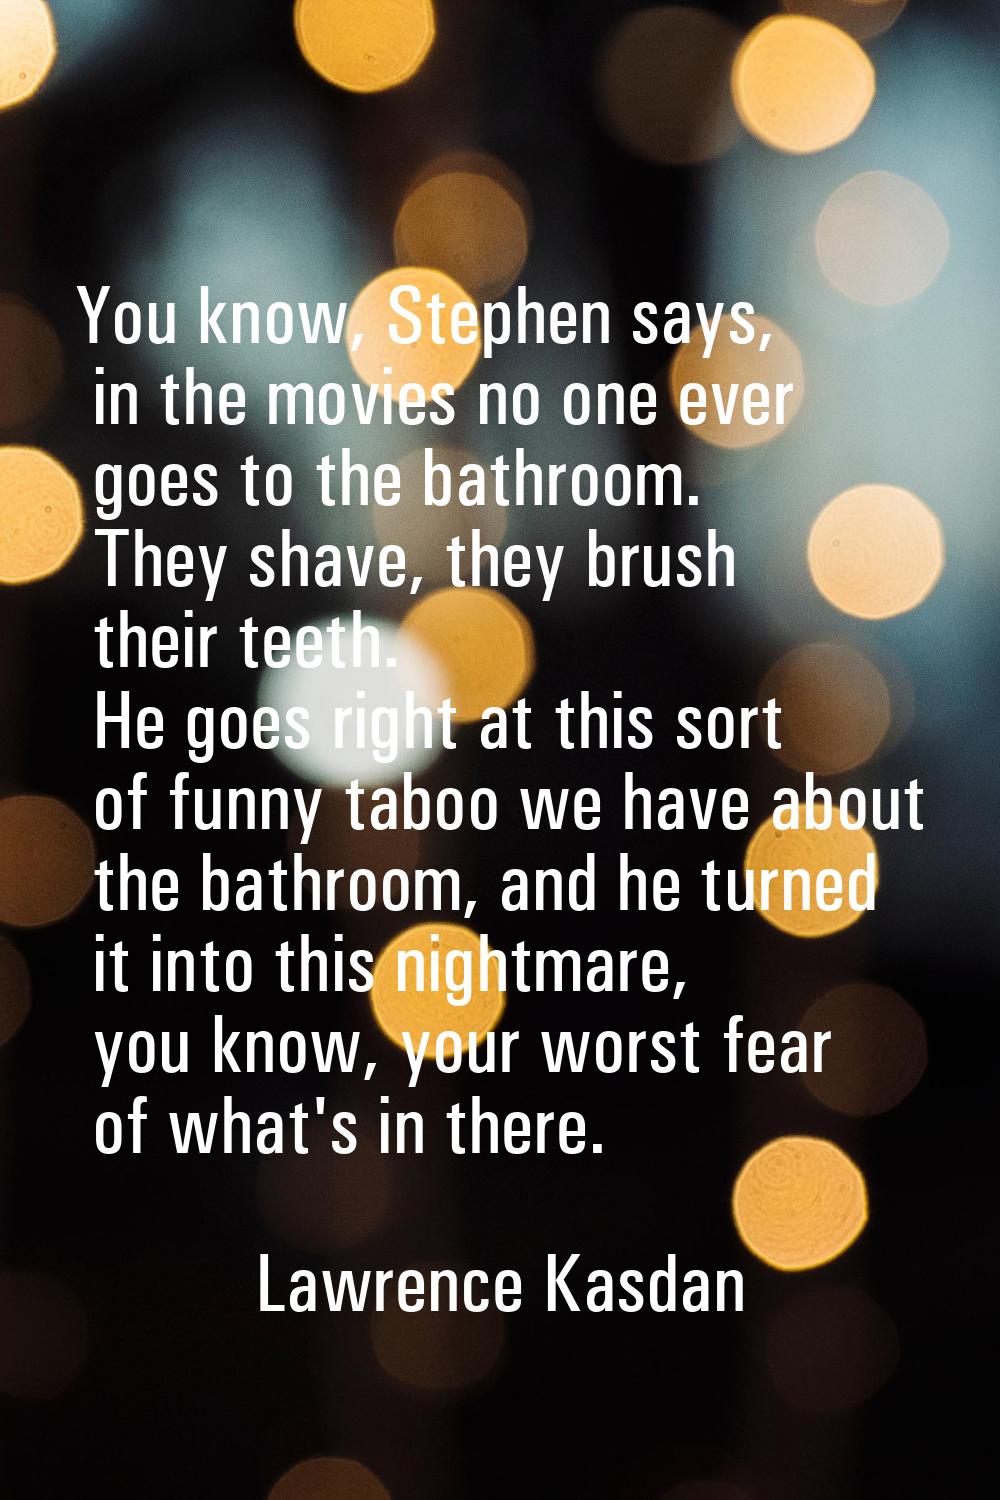 You know, Stephen says, in the movies no one ever goes to the bathroom. They shave, they brush thei